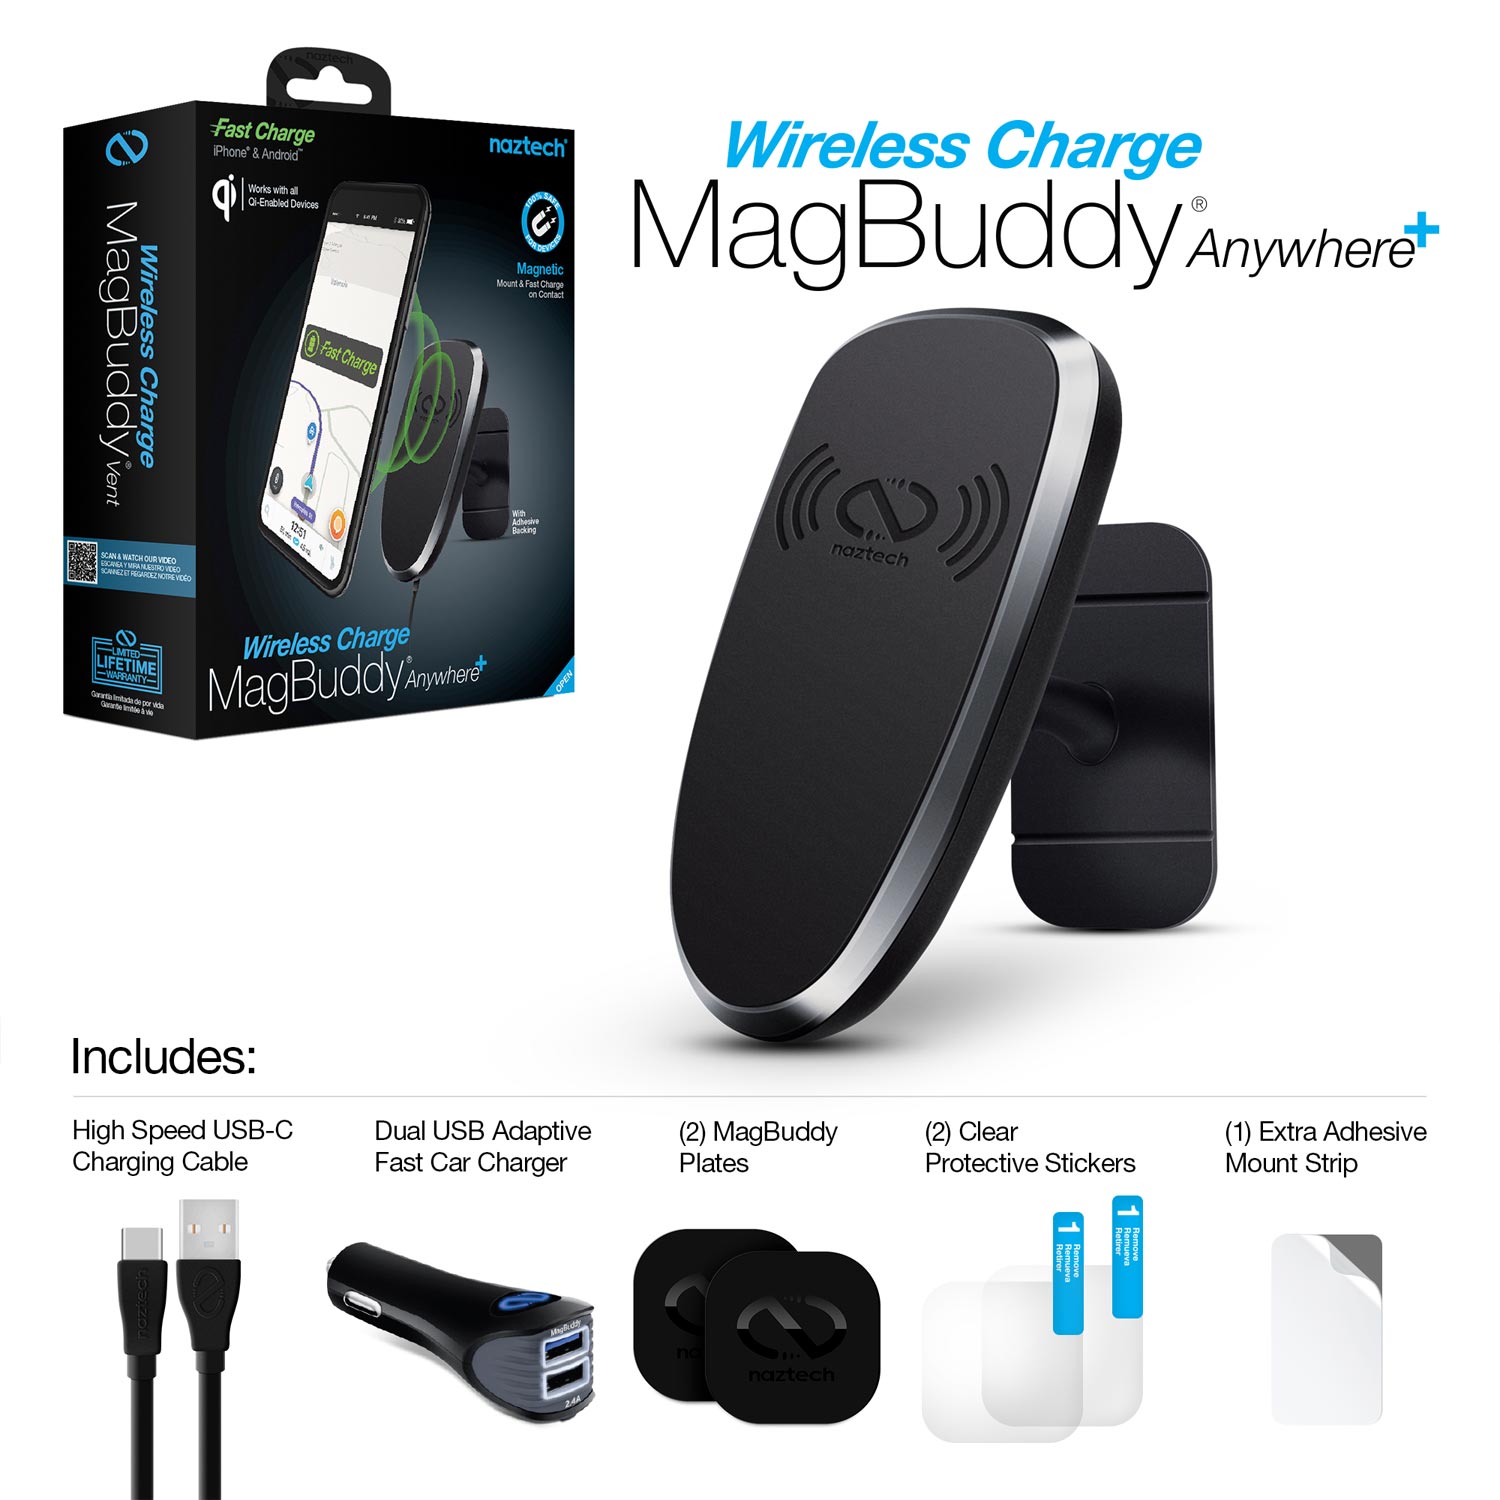 Wireless Charge Anywhere + Mount magbuddy